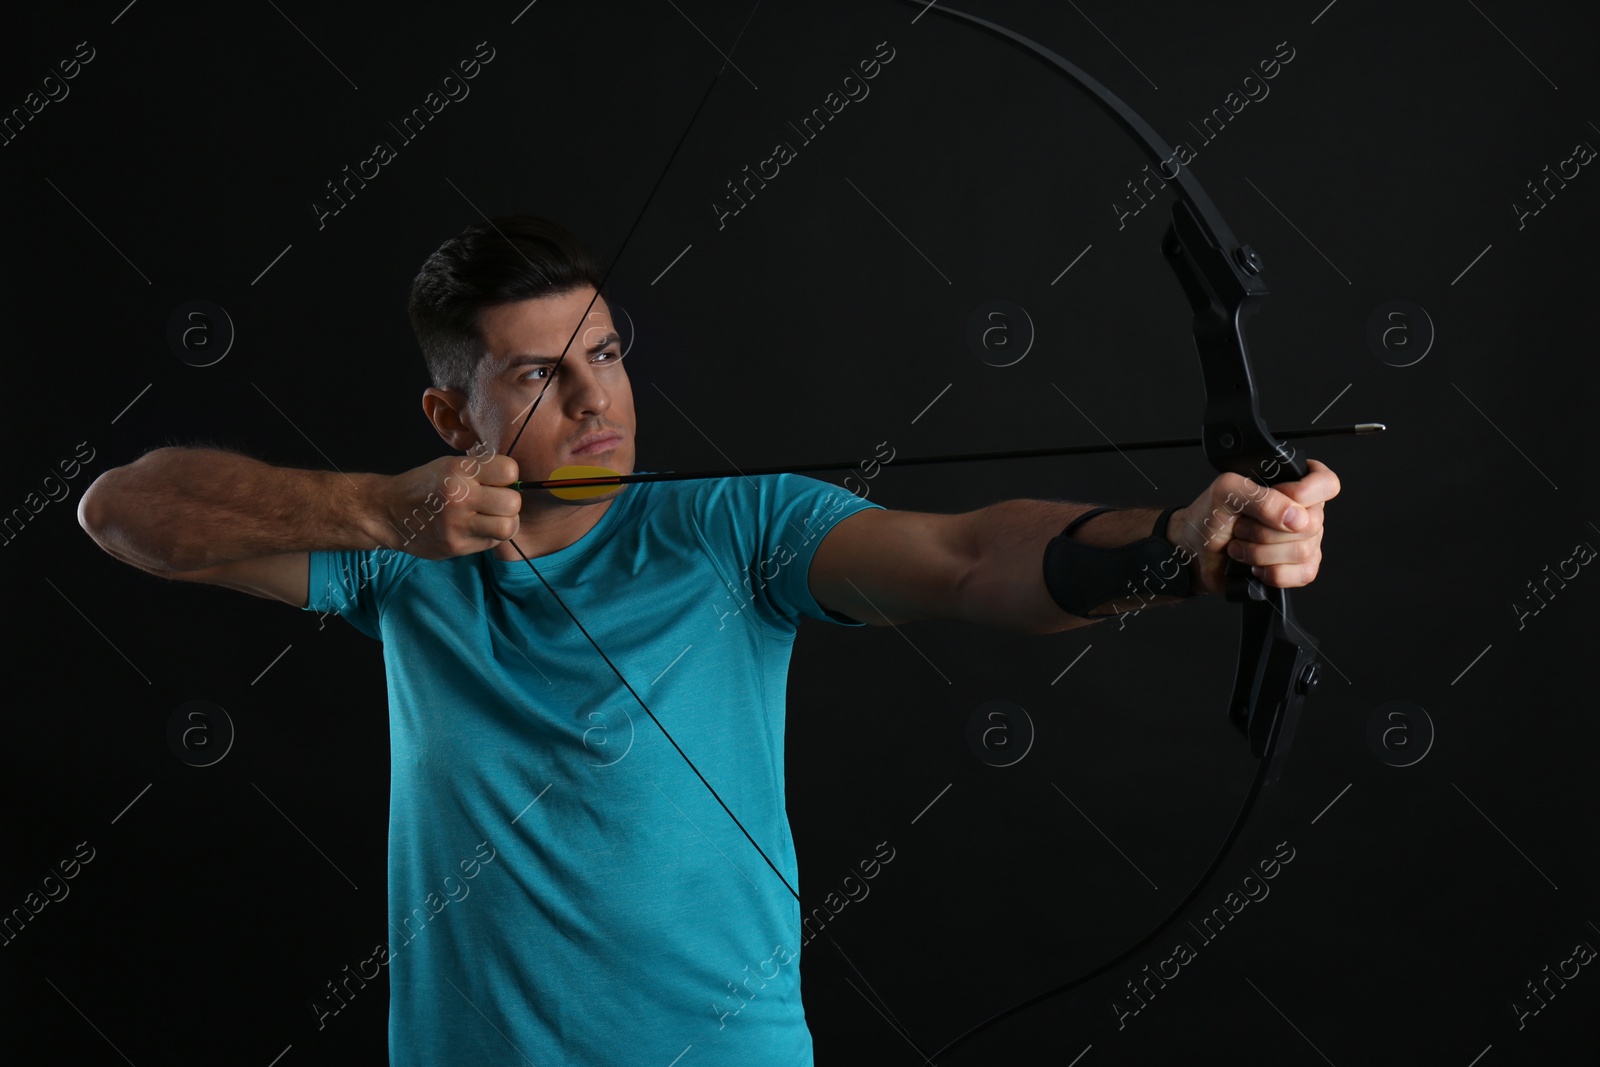 Photo of Man with bow and arrow practicing archery on black background